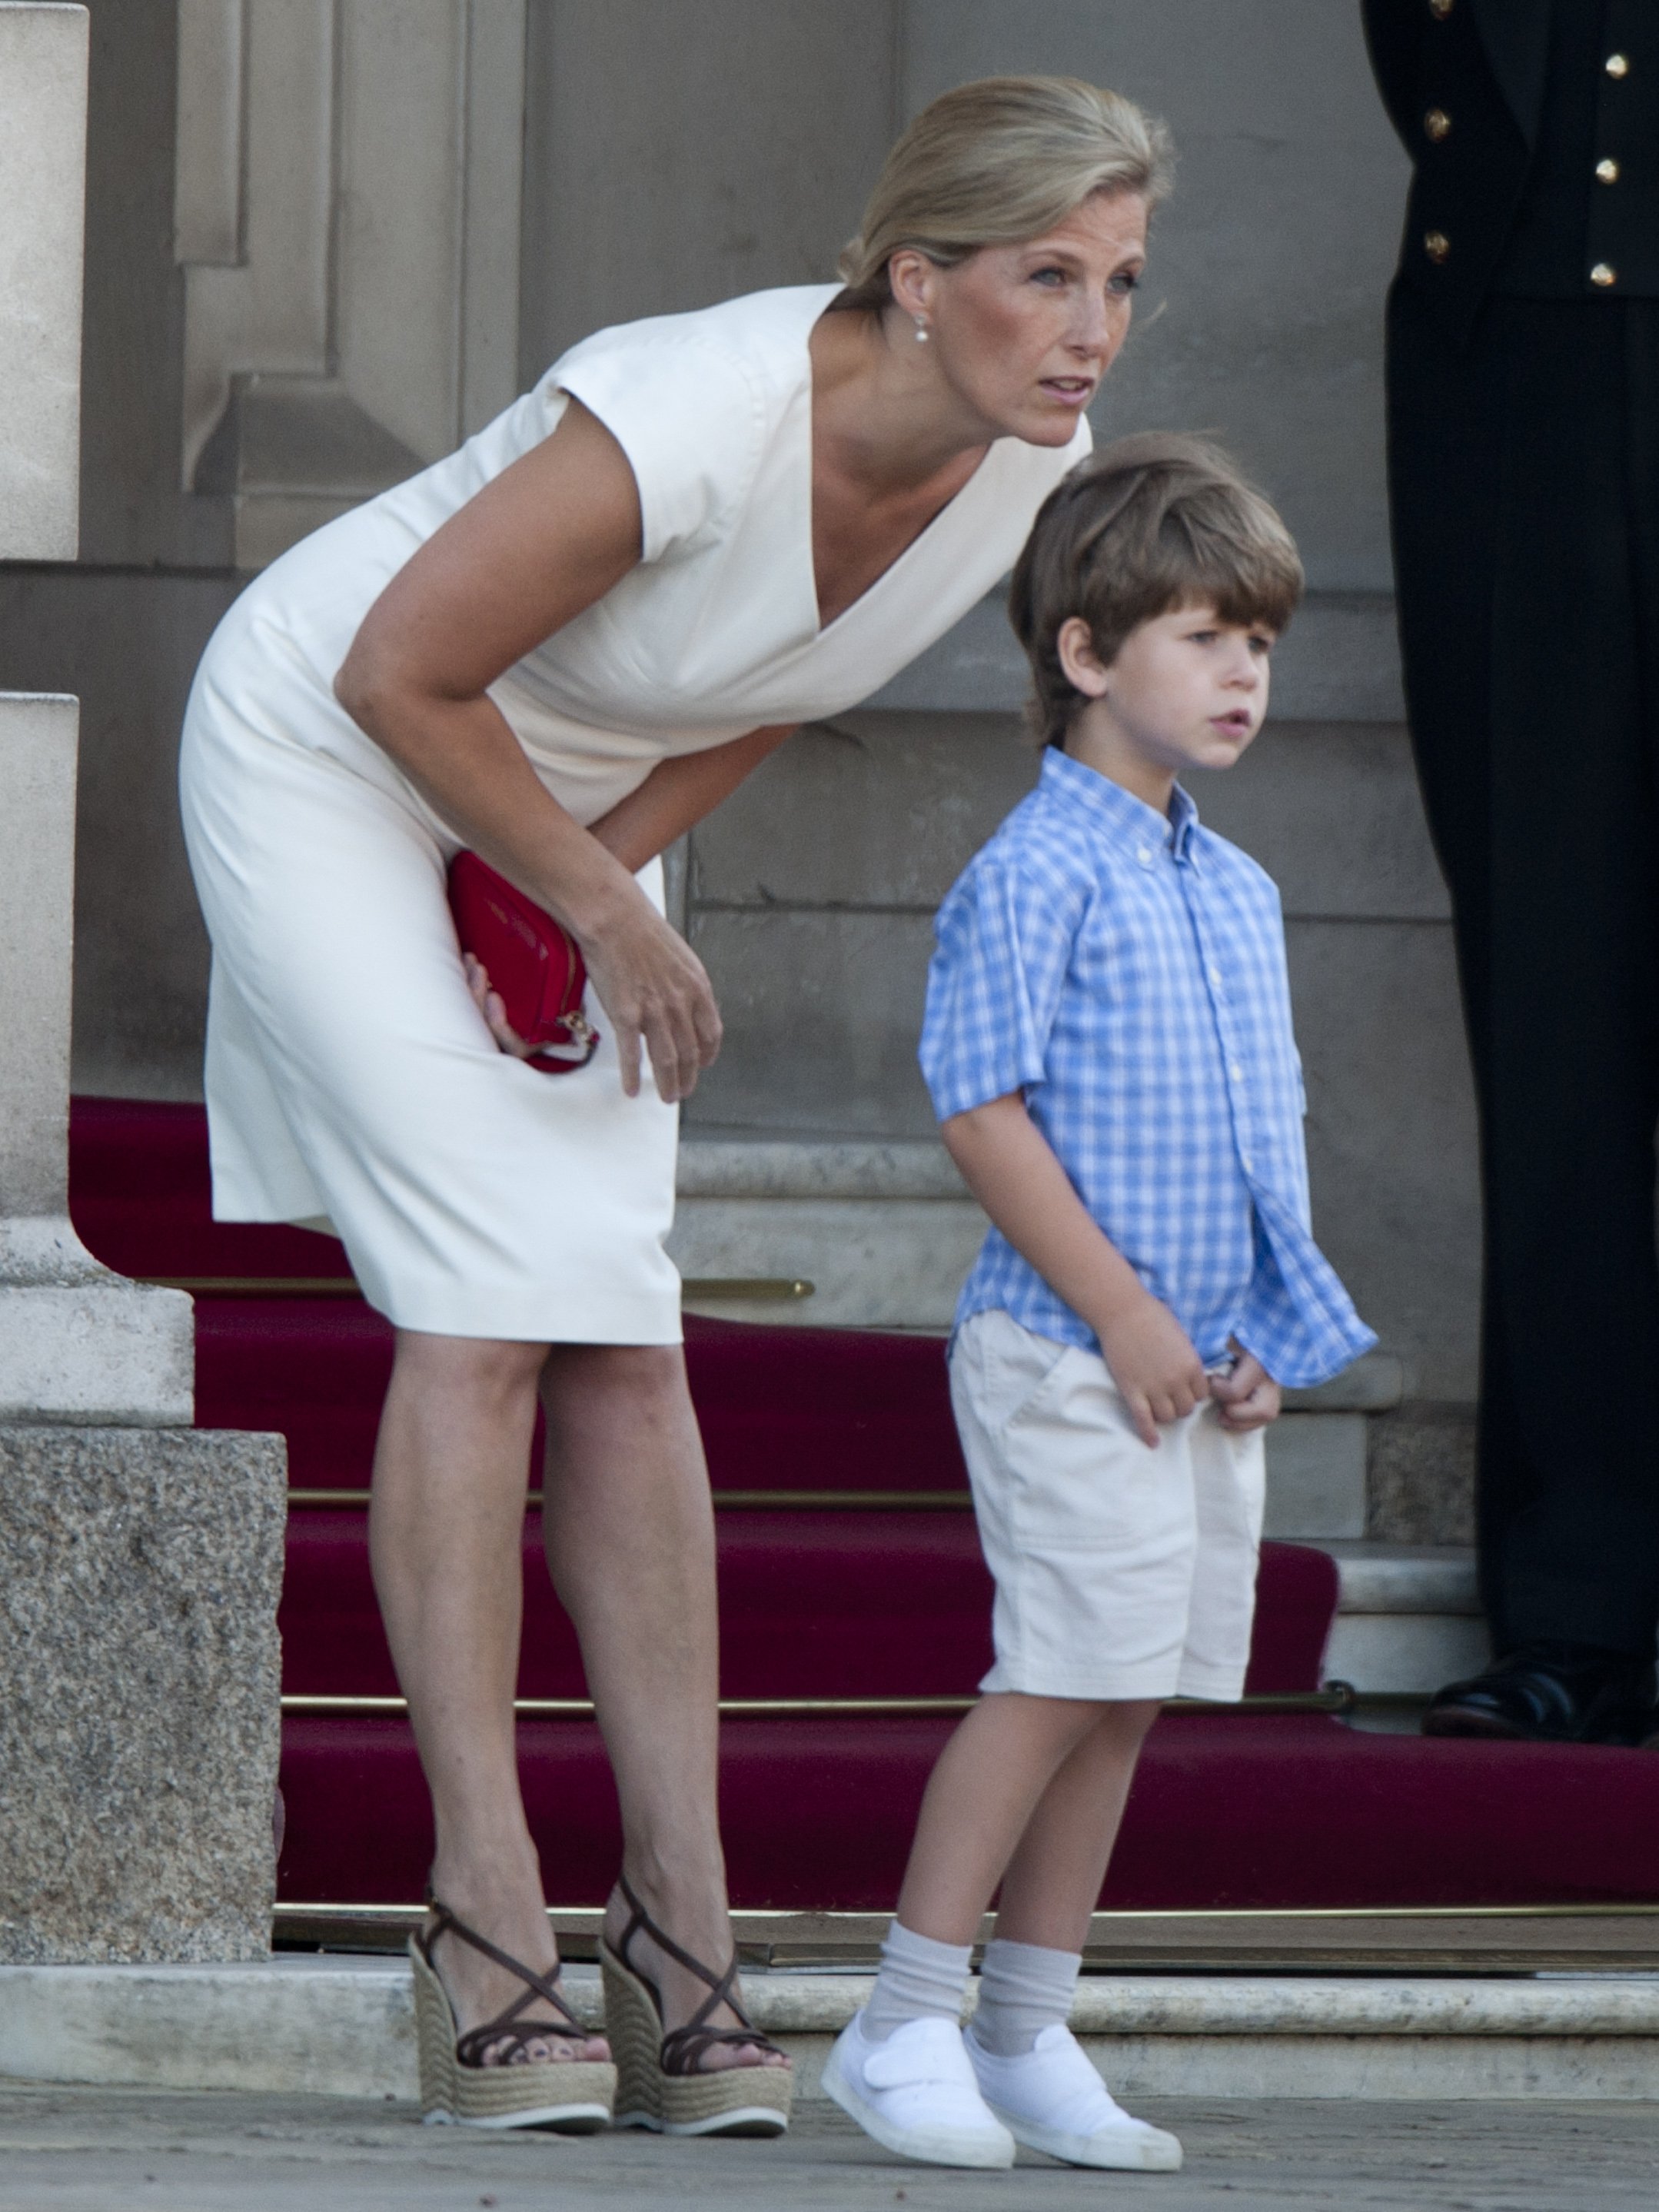 Sophie, Countess of Wessex, and her son, James, Viscount Severn watch The London 2012 Olympic Torch Relay on July 26, 2012, at Buckingham Palace, London. | Source: Getty Images